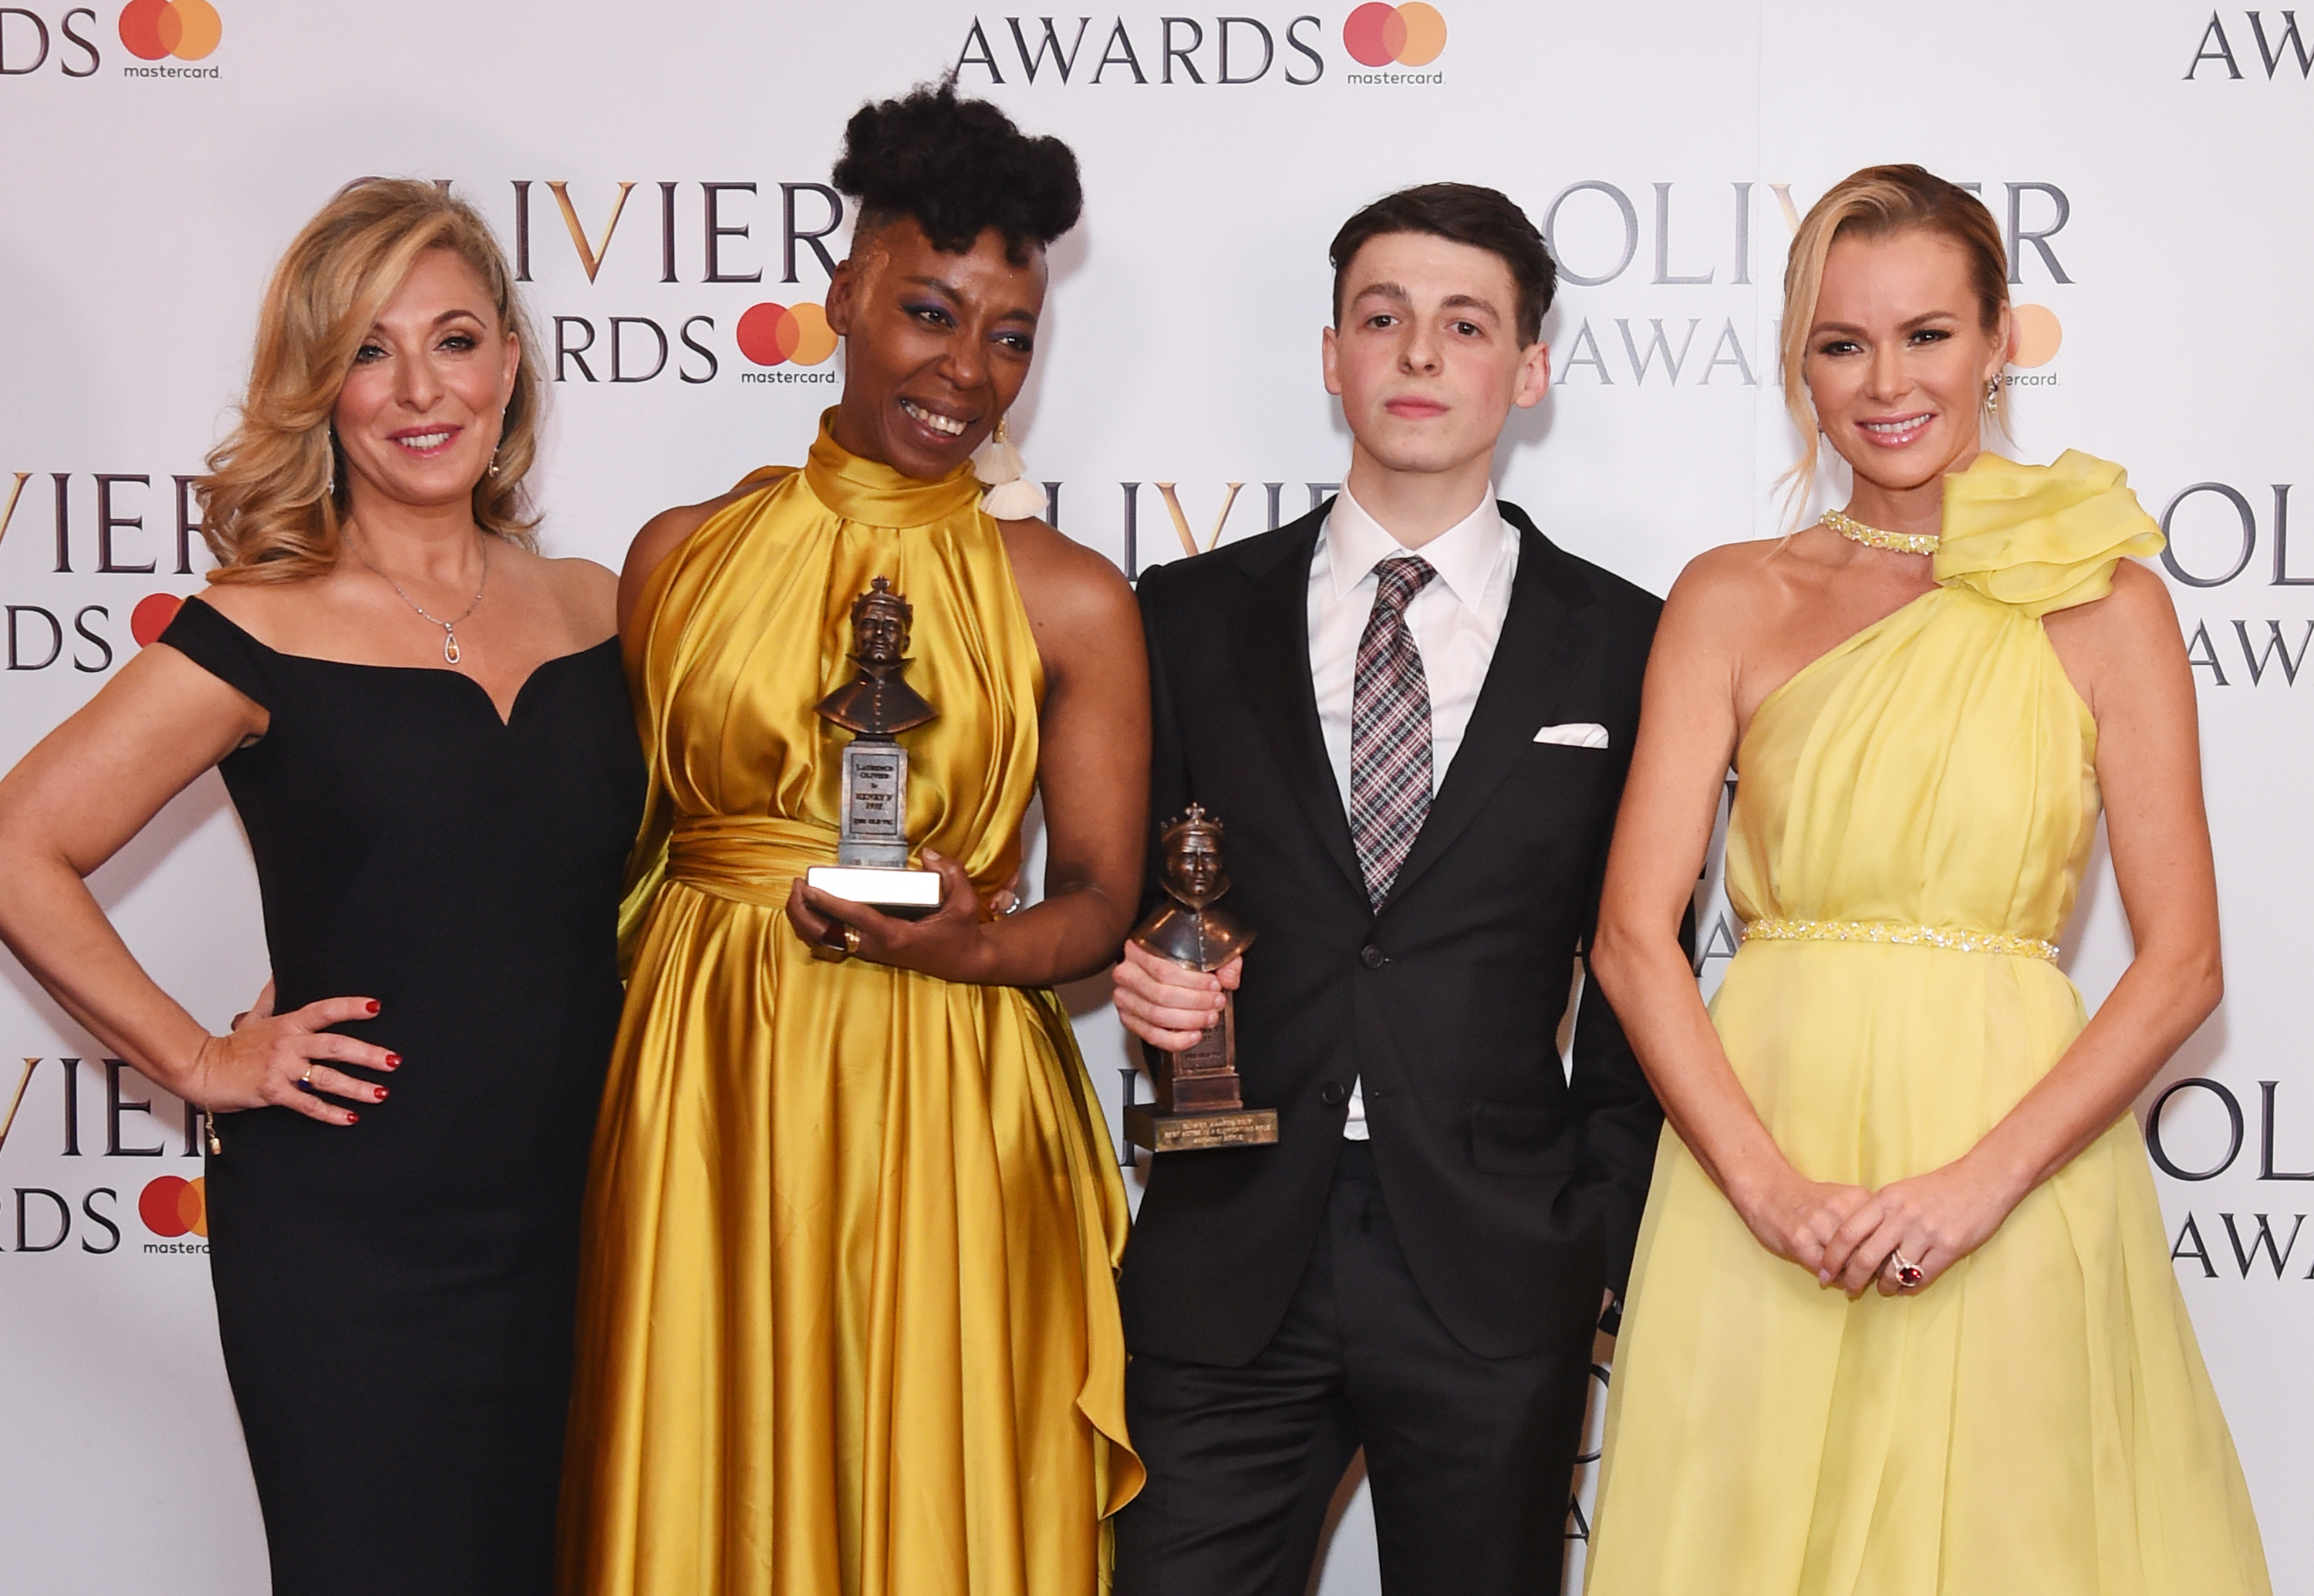 (L to R) Tracy-Ann Oberman, Noma Dumezweni, winner of the Best Actress in a Supporting Role for "Harry Potter And The Cursed Child", Anthony Boyle, winner of the Best Actor in a Supporting Role award for "Harry Potter And The Cursed Child", and Amanda Holden pose in the winners room at The Olivier Awards 2017 at Royal Albert Hall on April 9, 2017 in London. (David M. Benett—Dave Benett/Getty Images)